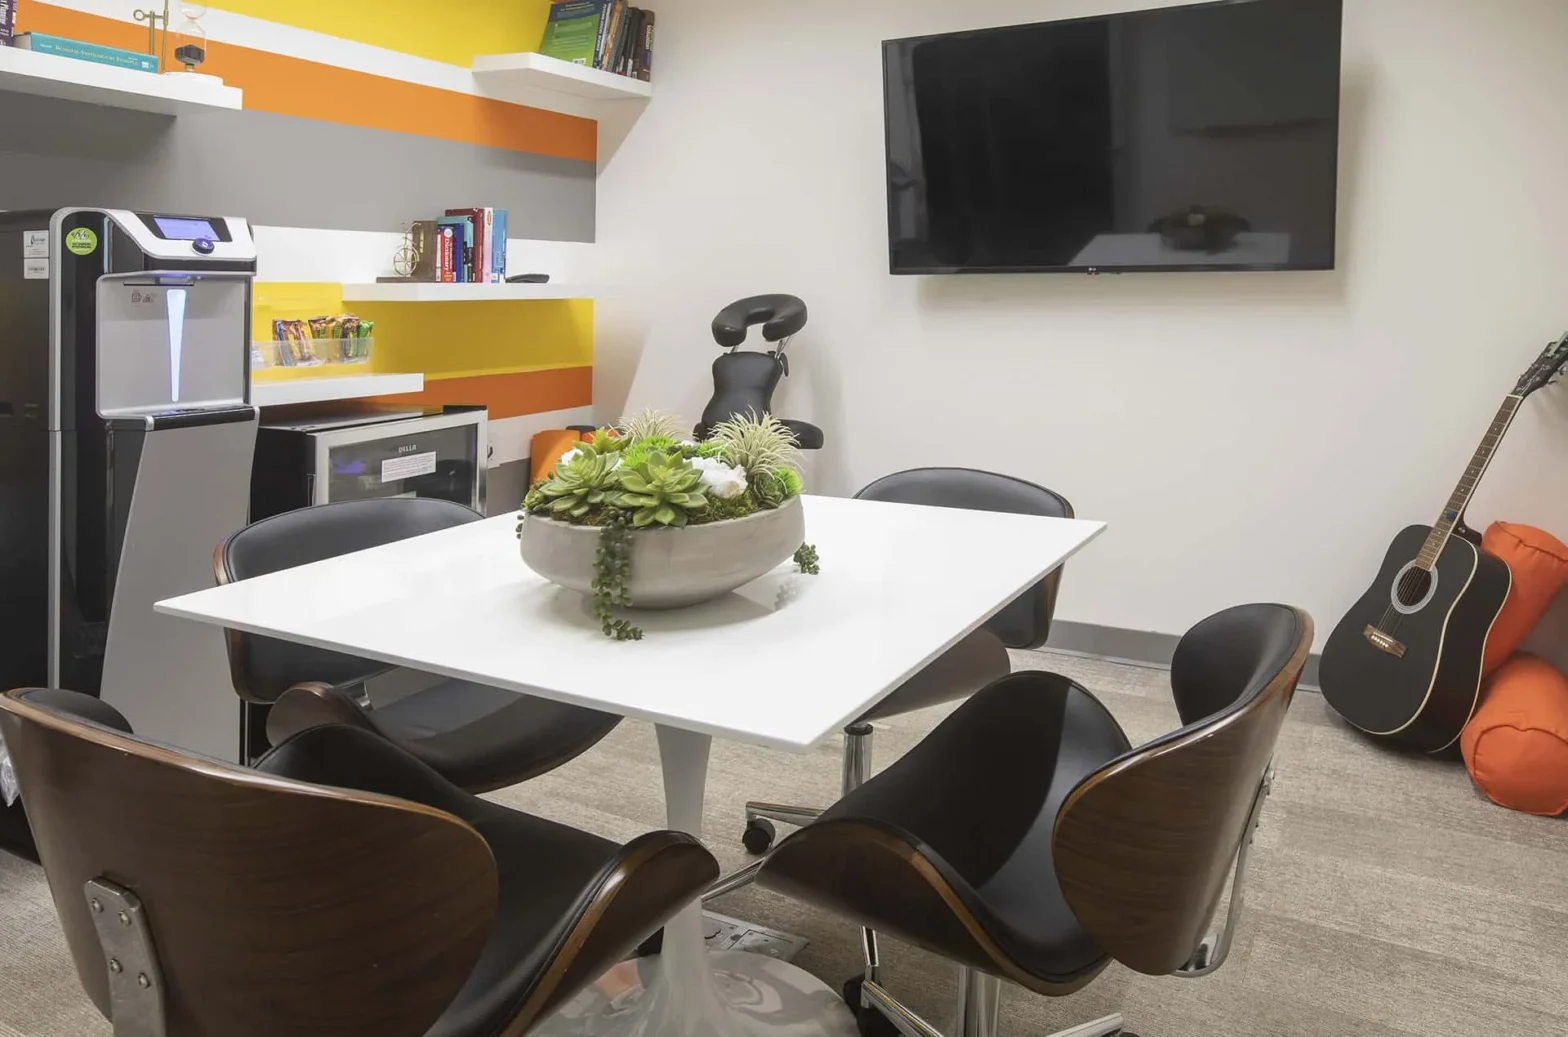 Our shared office space rentals offer a cost-effective solution for growing teams: flexible, customisable, private, and designed to promote collaboration.